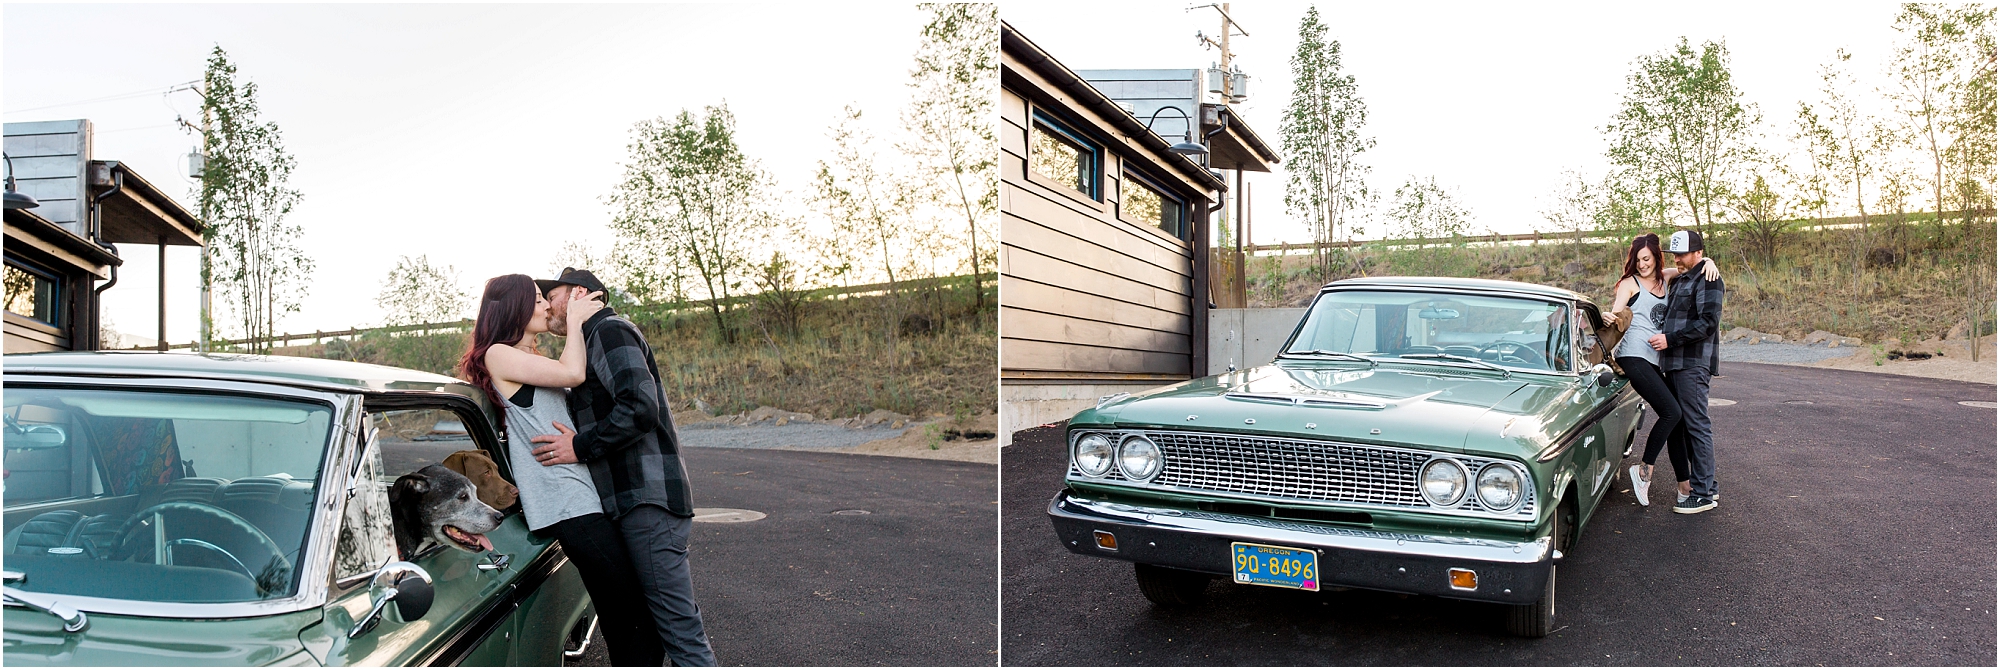 The coolest couple poses with their classic car in front of Boneyard Beer's pub in Bend, OR during their engagement photo session. | Erica Swantek Photography